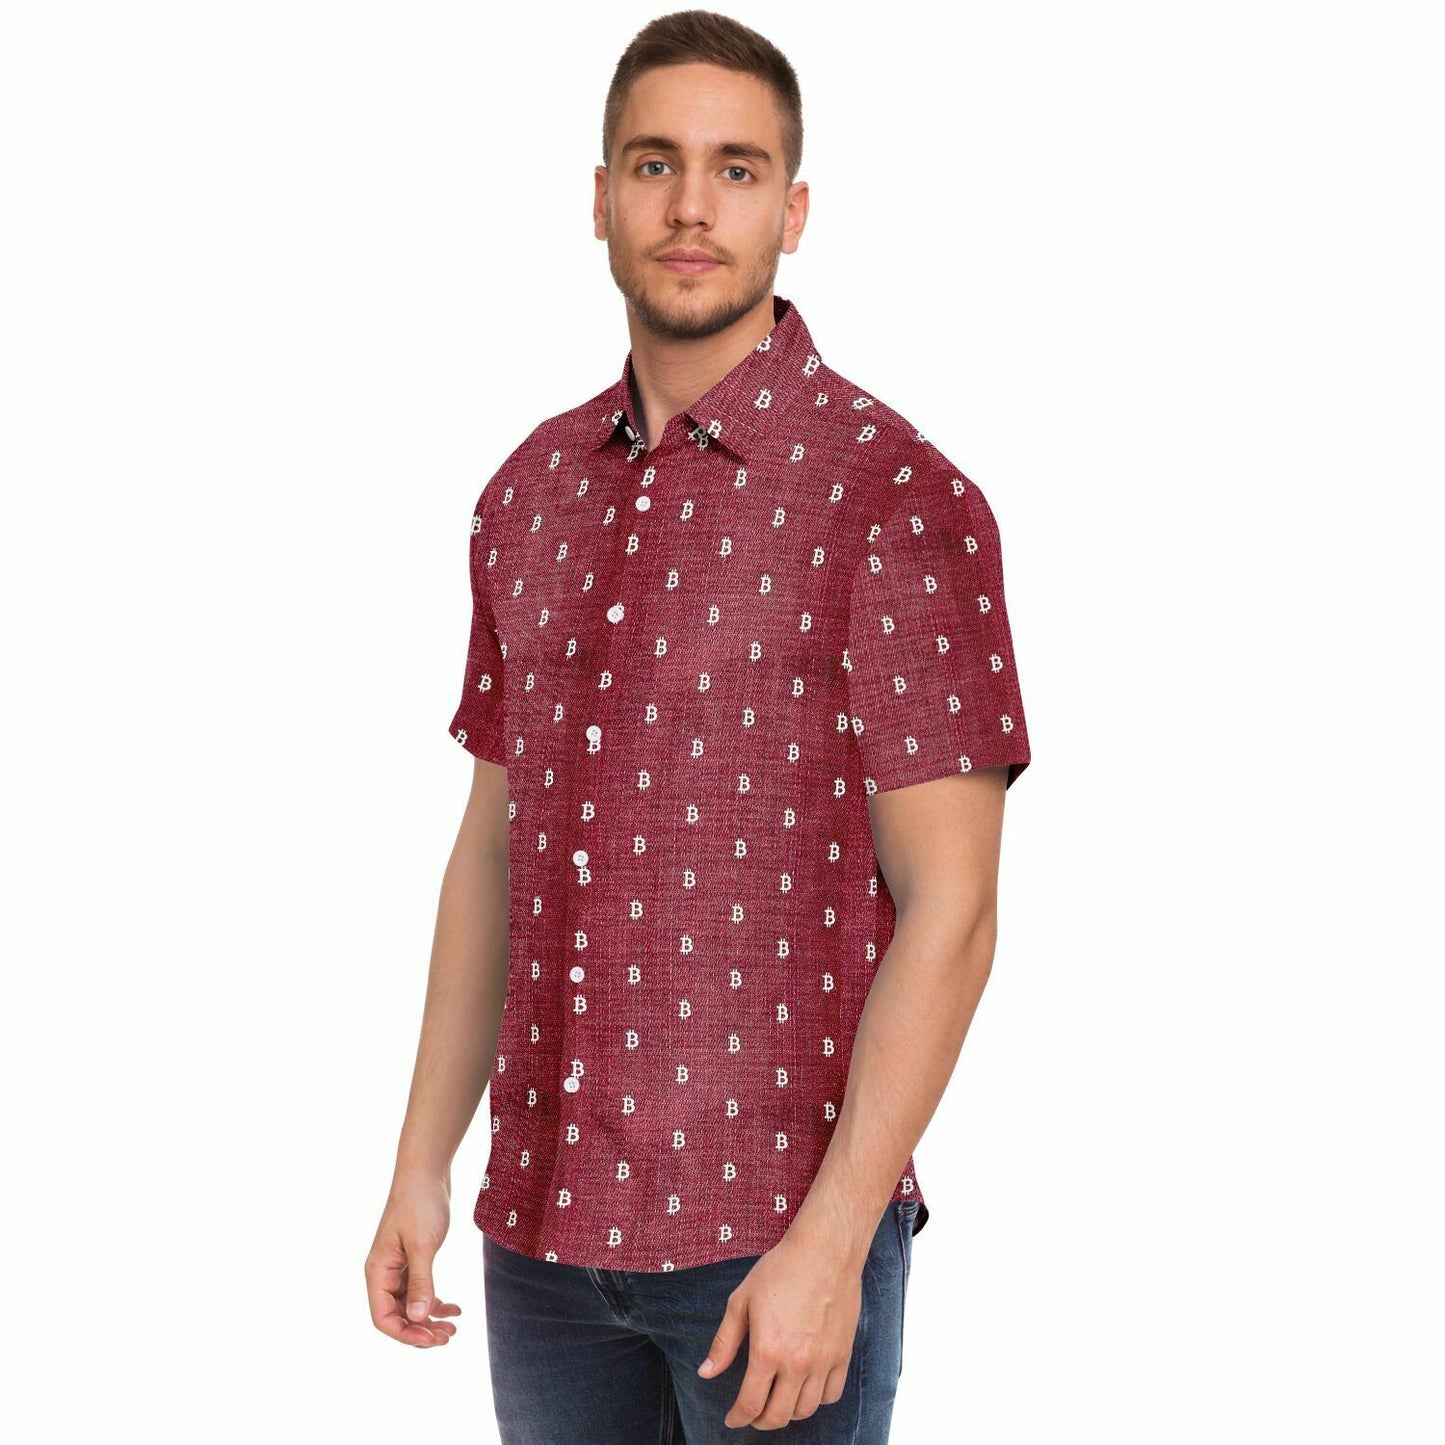 Bitcoin Jeans Red Shirt